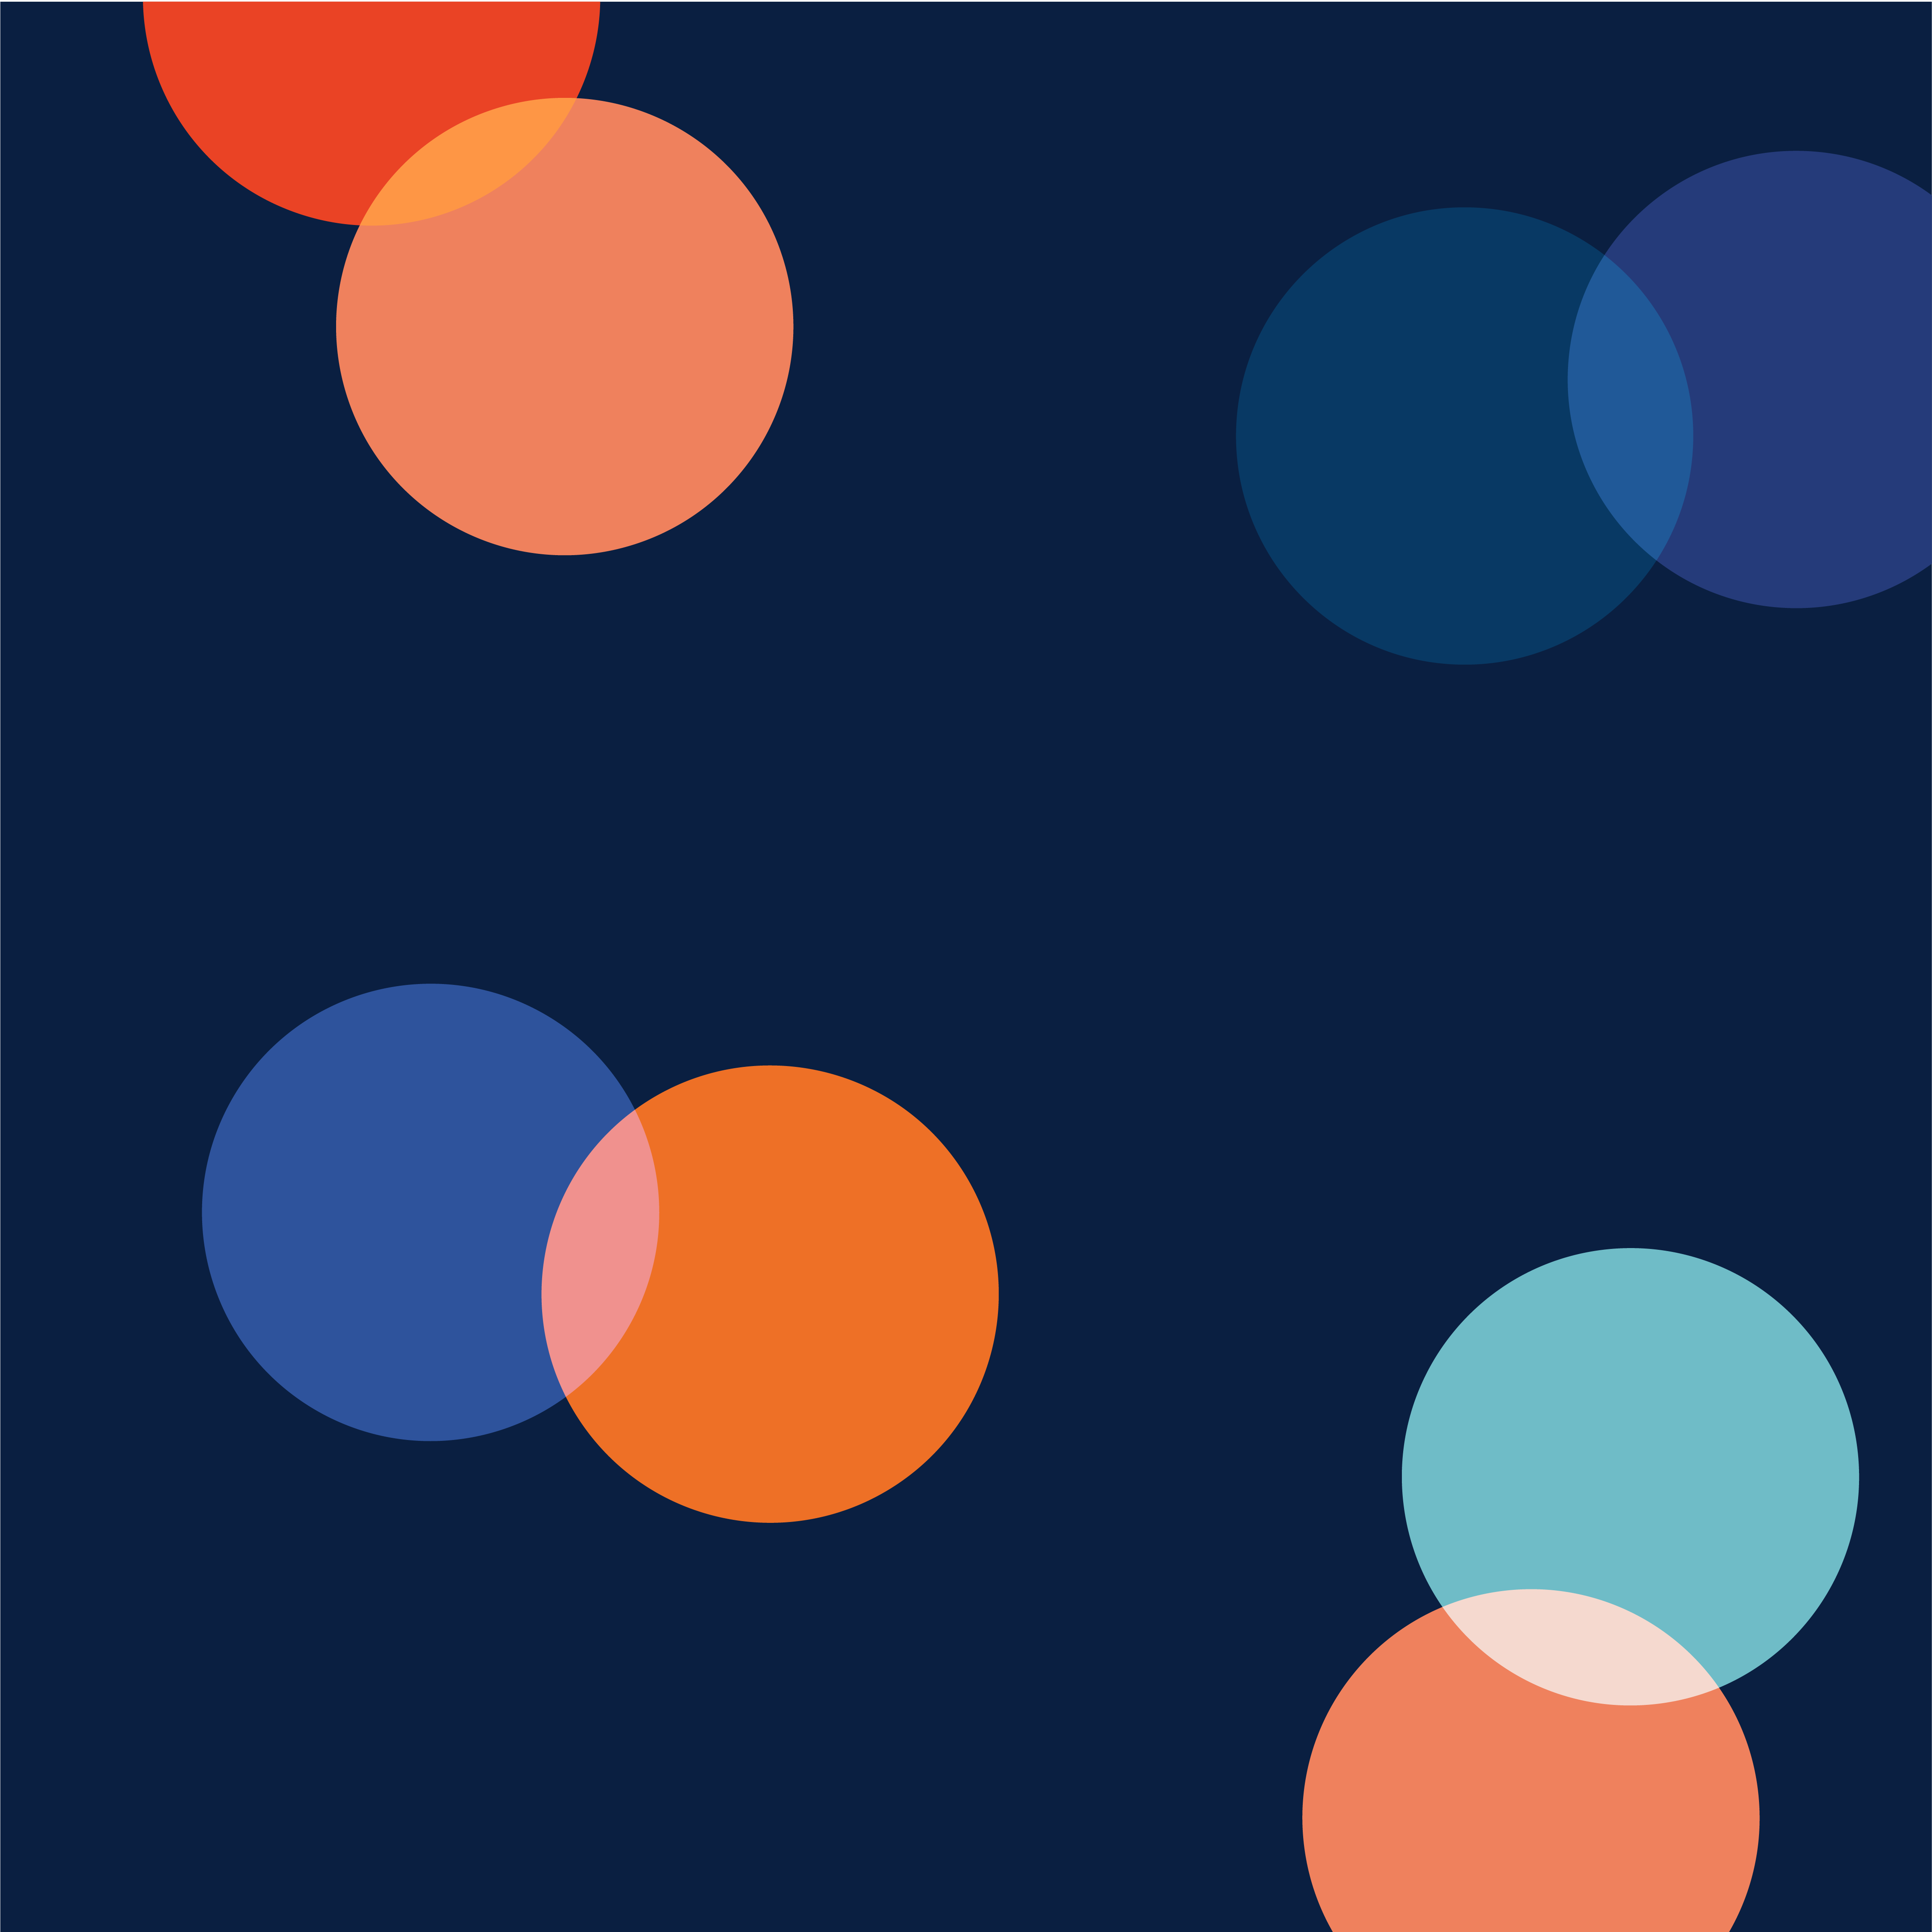 Blue, orange and red circles on a navy background